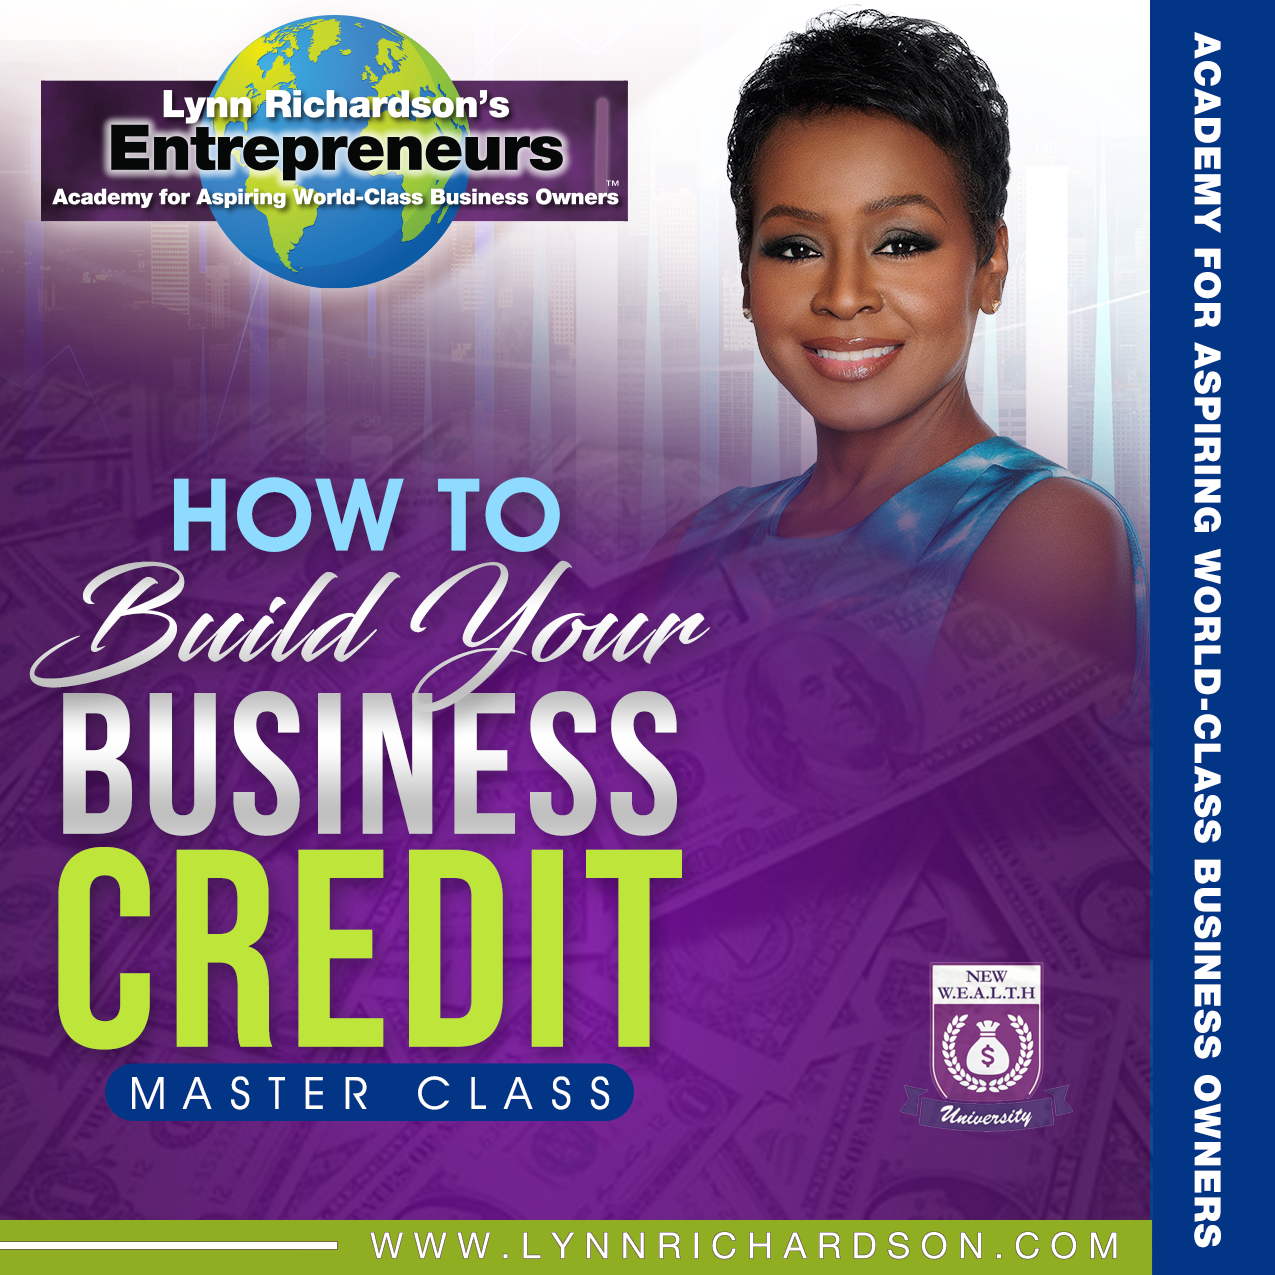 How to Build Business Credit